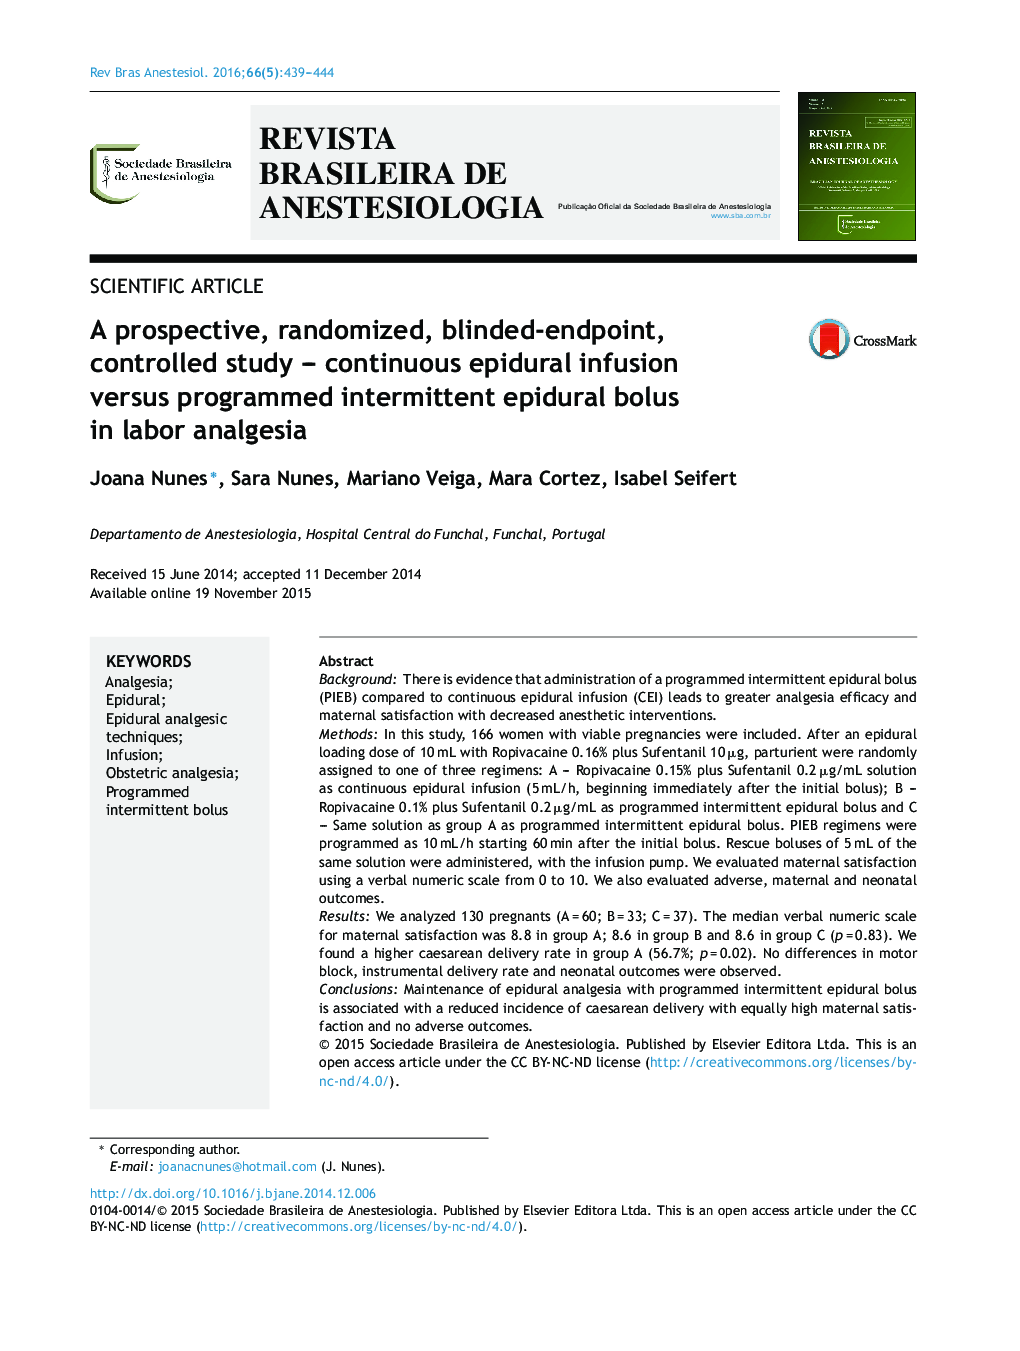 A prospective, randomized, blinded-endpoint, controlled study – continuous epidural infusion versus programmed intermittent epidural bolus in labor analgesia